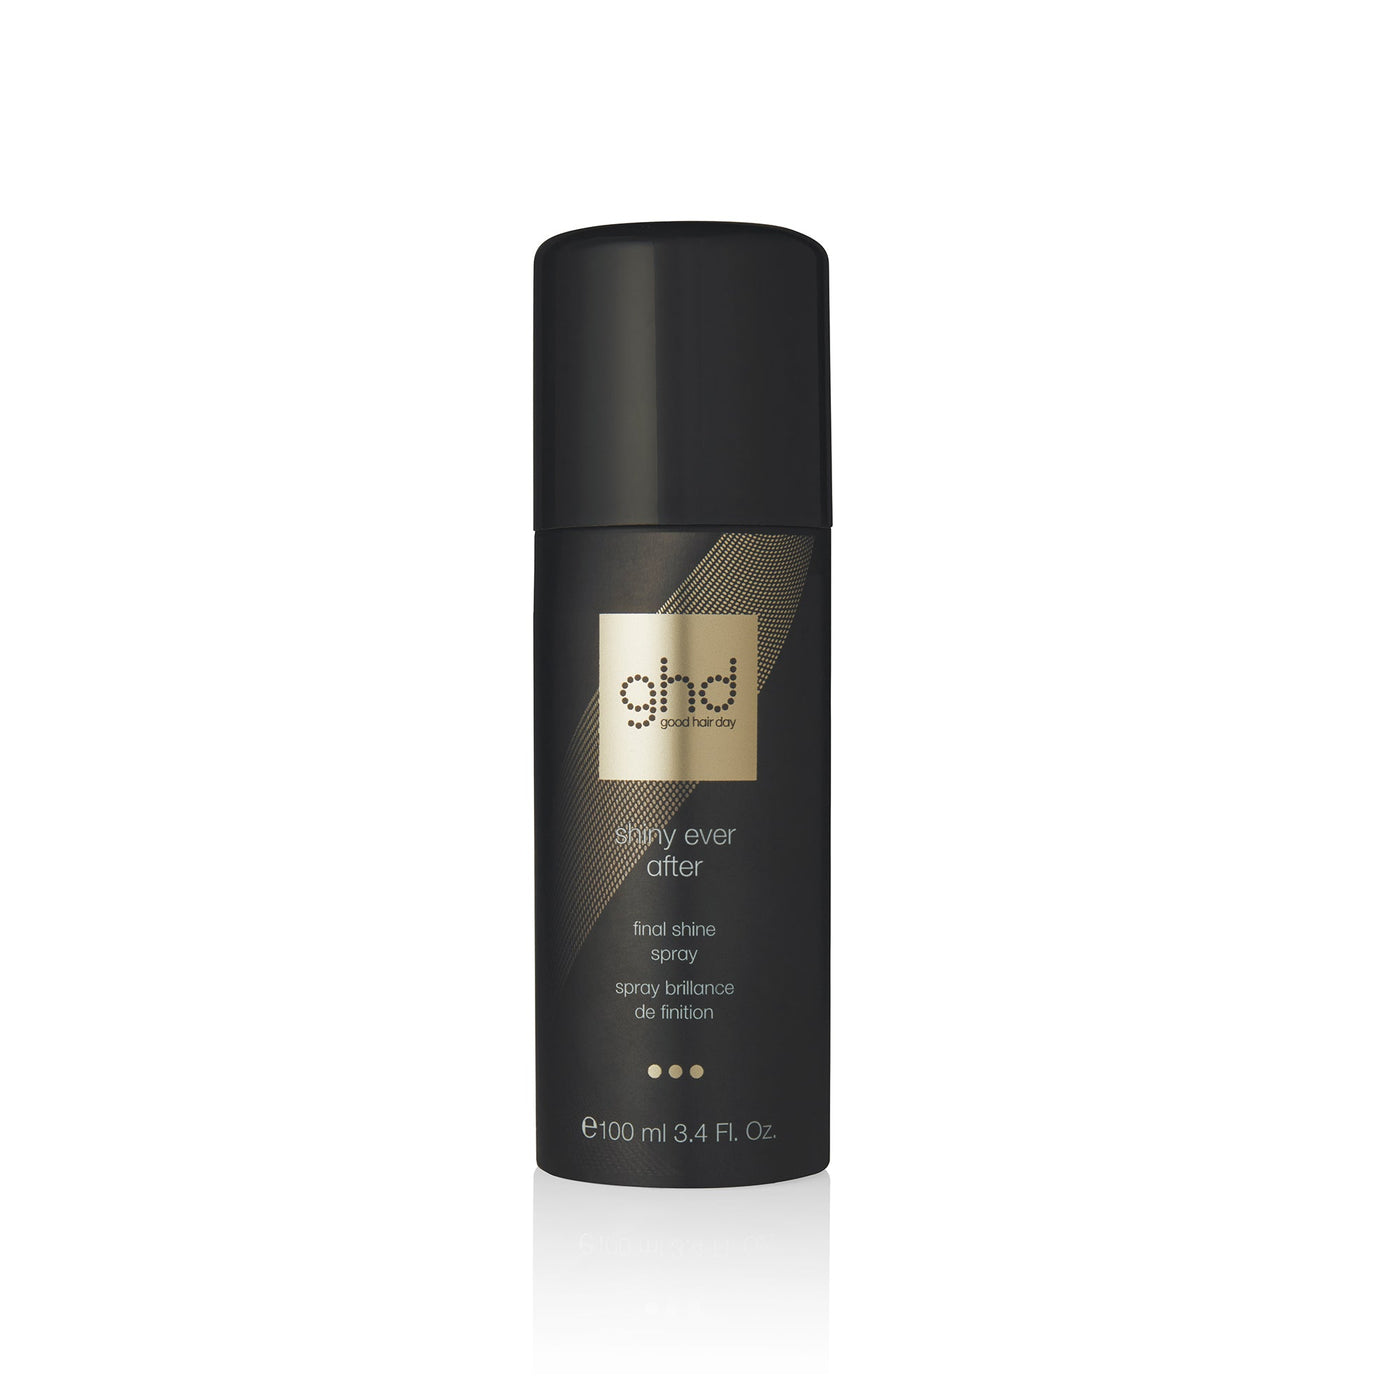 ghd Shiny Ever After Final Shine Spray (100ml)